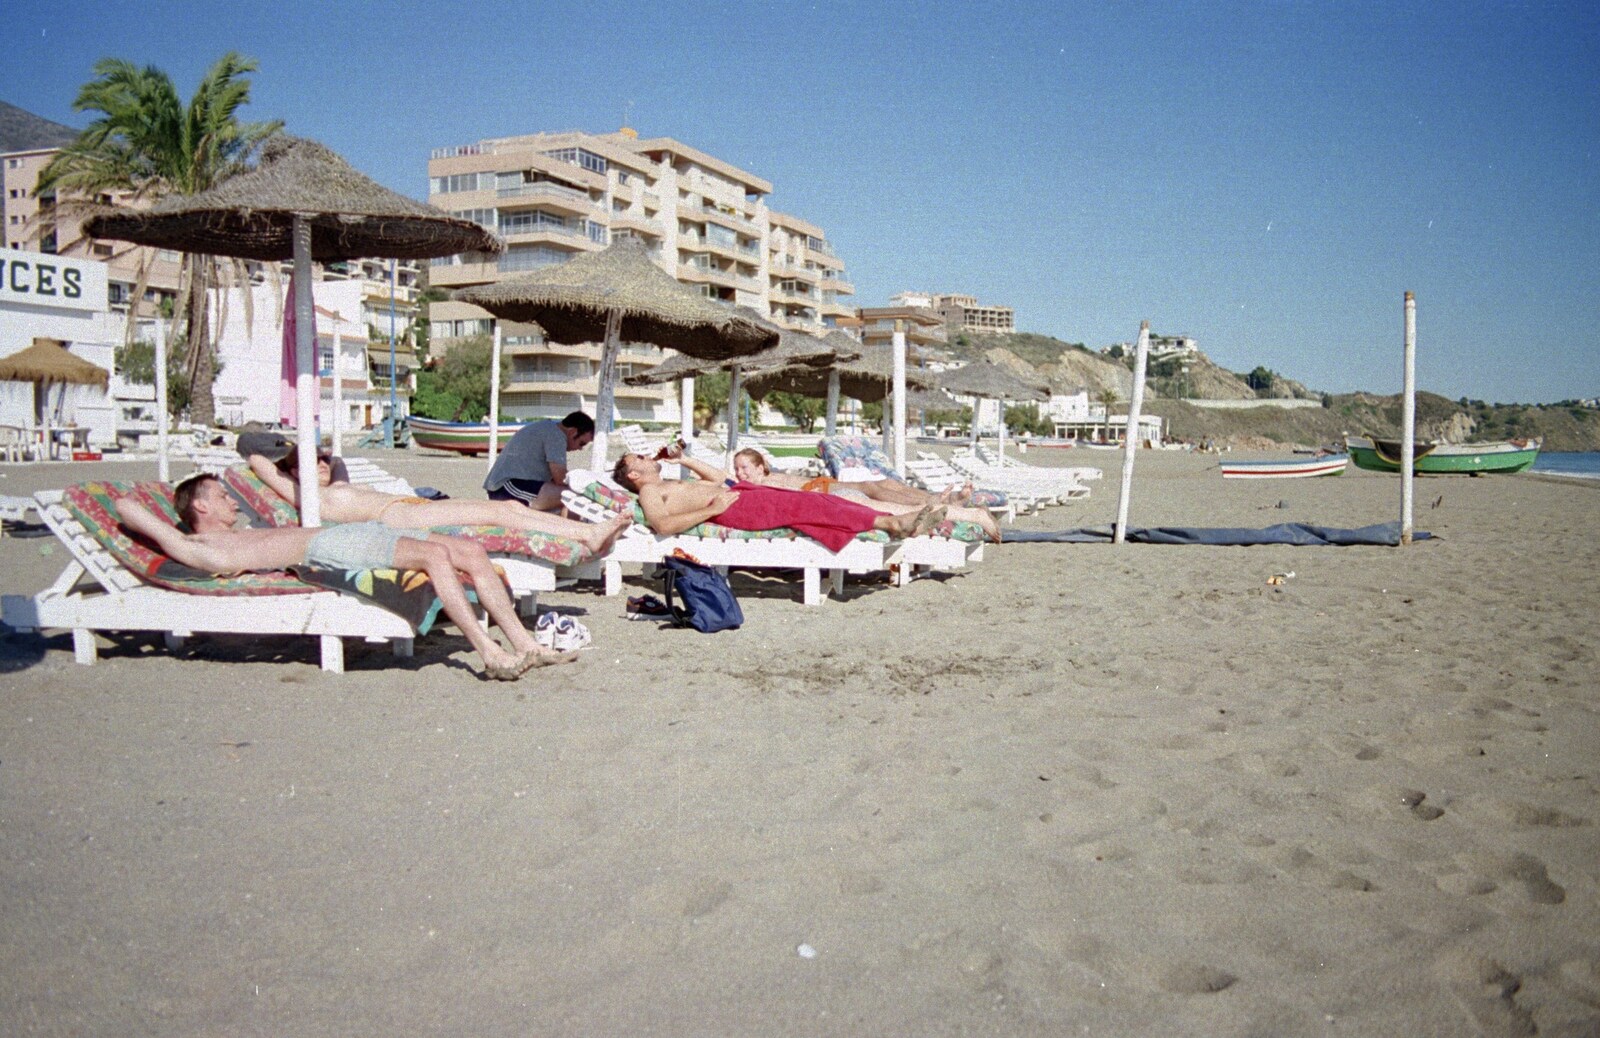 We have the beach almost to ourselves from The CISU Massive do Malaga, Spain - November 14th 1998